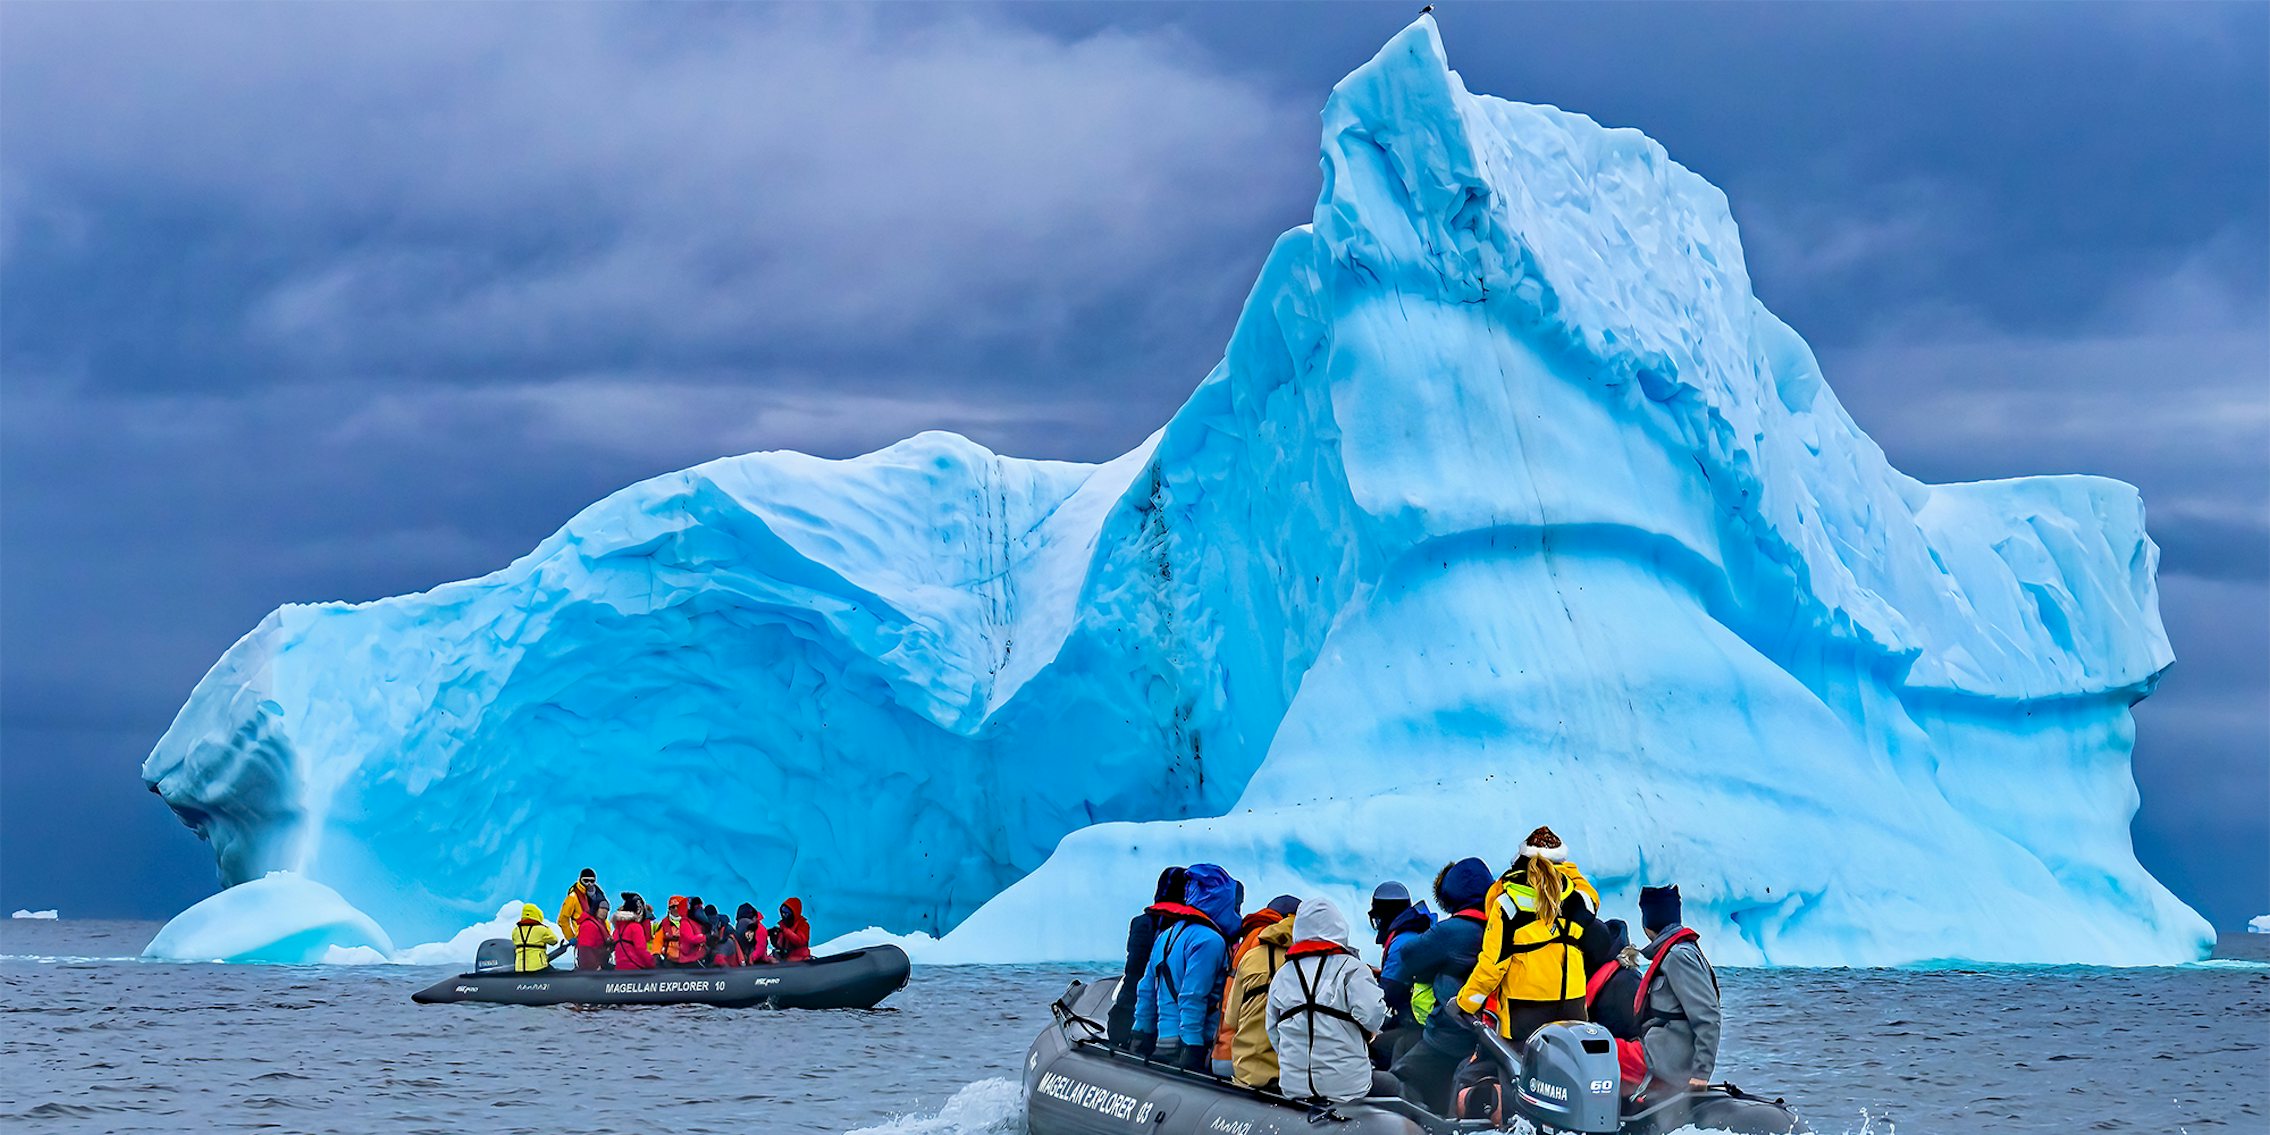 CHARLOTTE BAY, ANTARCTICA - DECEMBER 26, 2019 Tourists Rubber Boats Large Blue Iceberg Charlotte Bay Antarctic Peninsula Antarctica. Glacier ice blue because air squeezed out of snow, which shows that antarctica is real